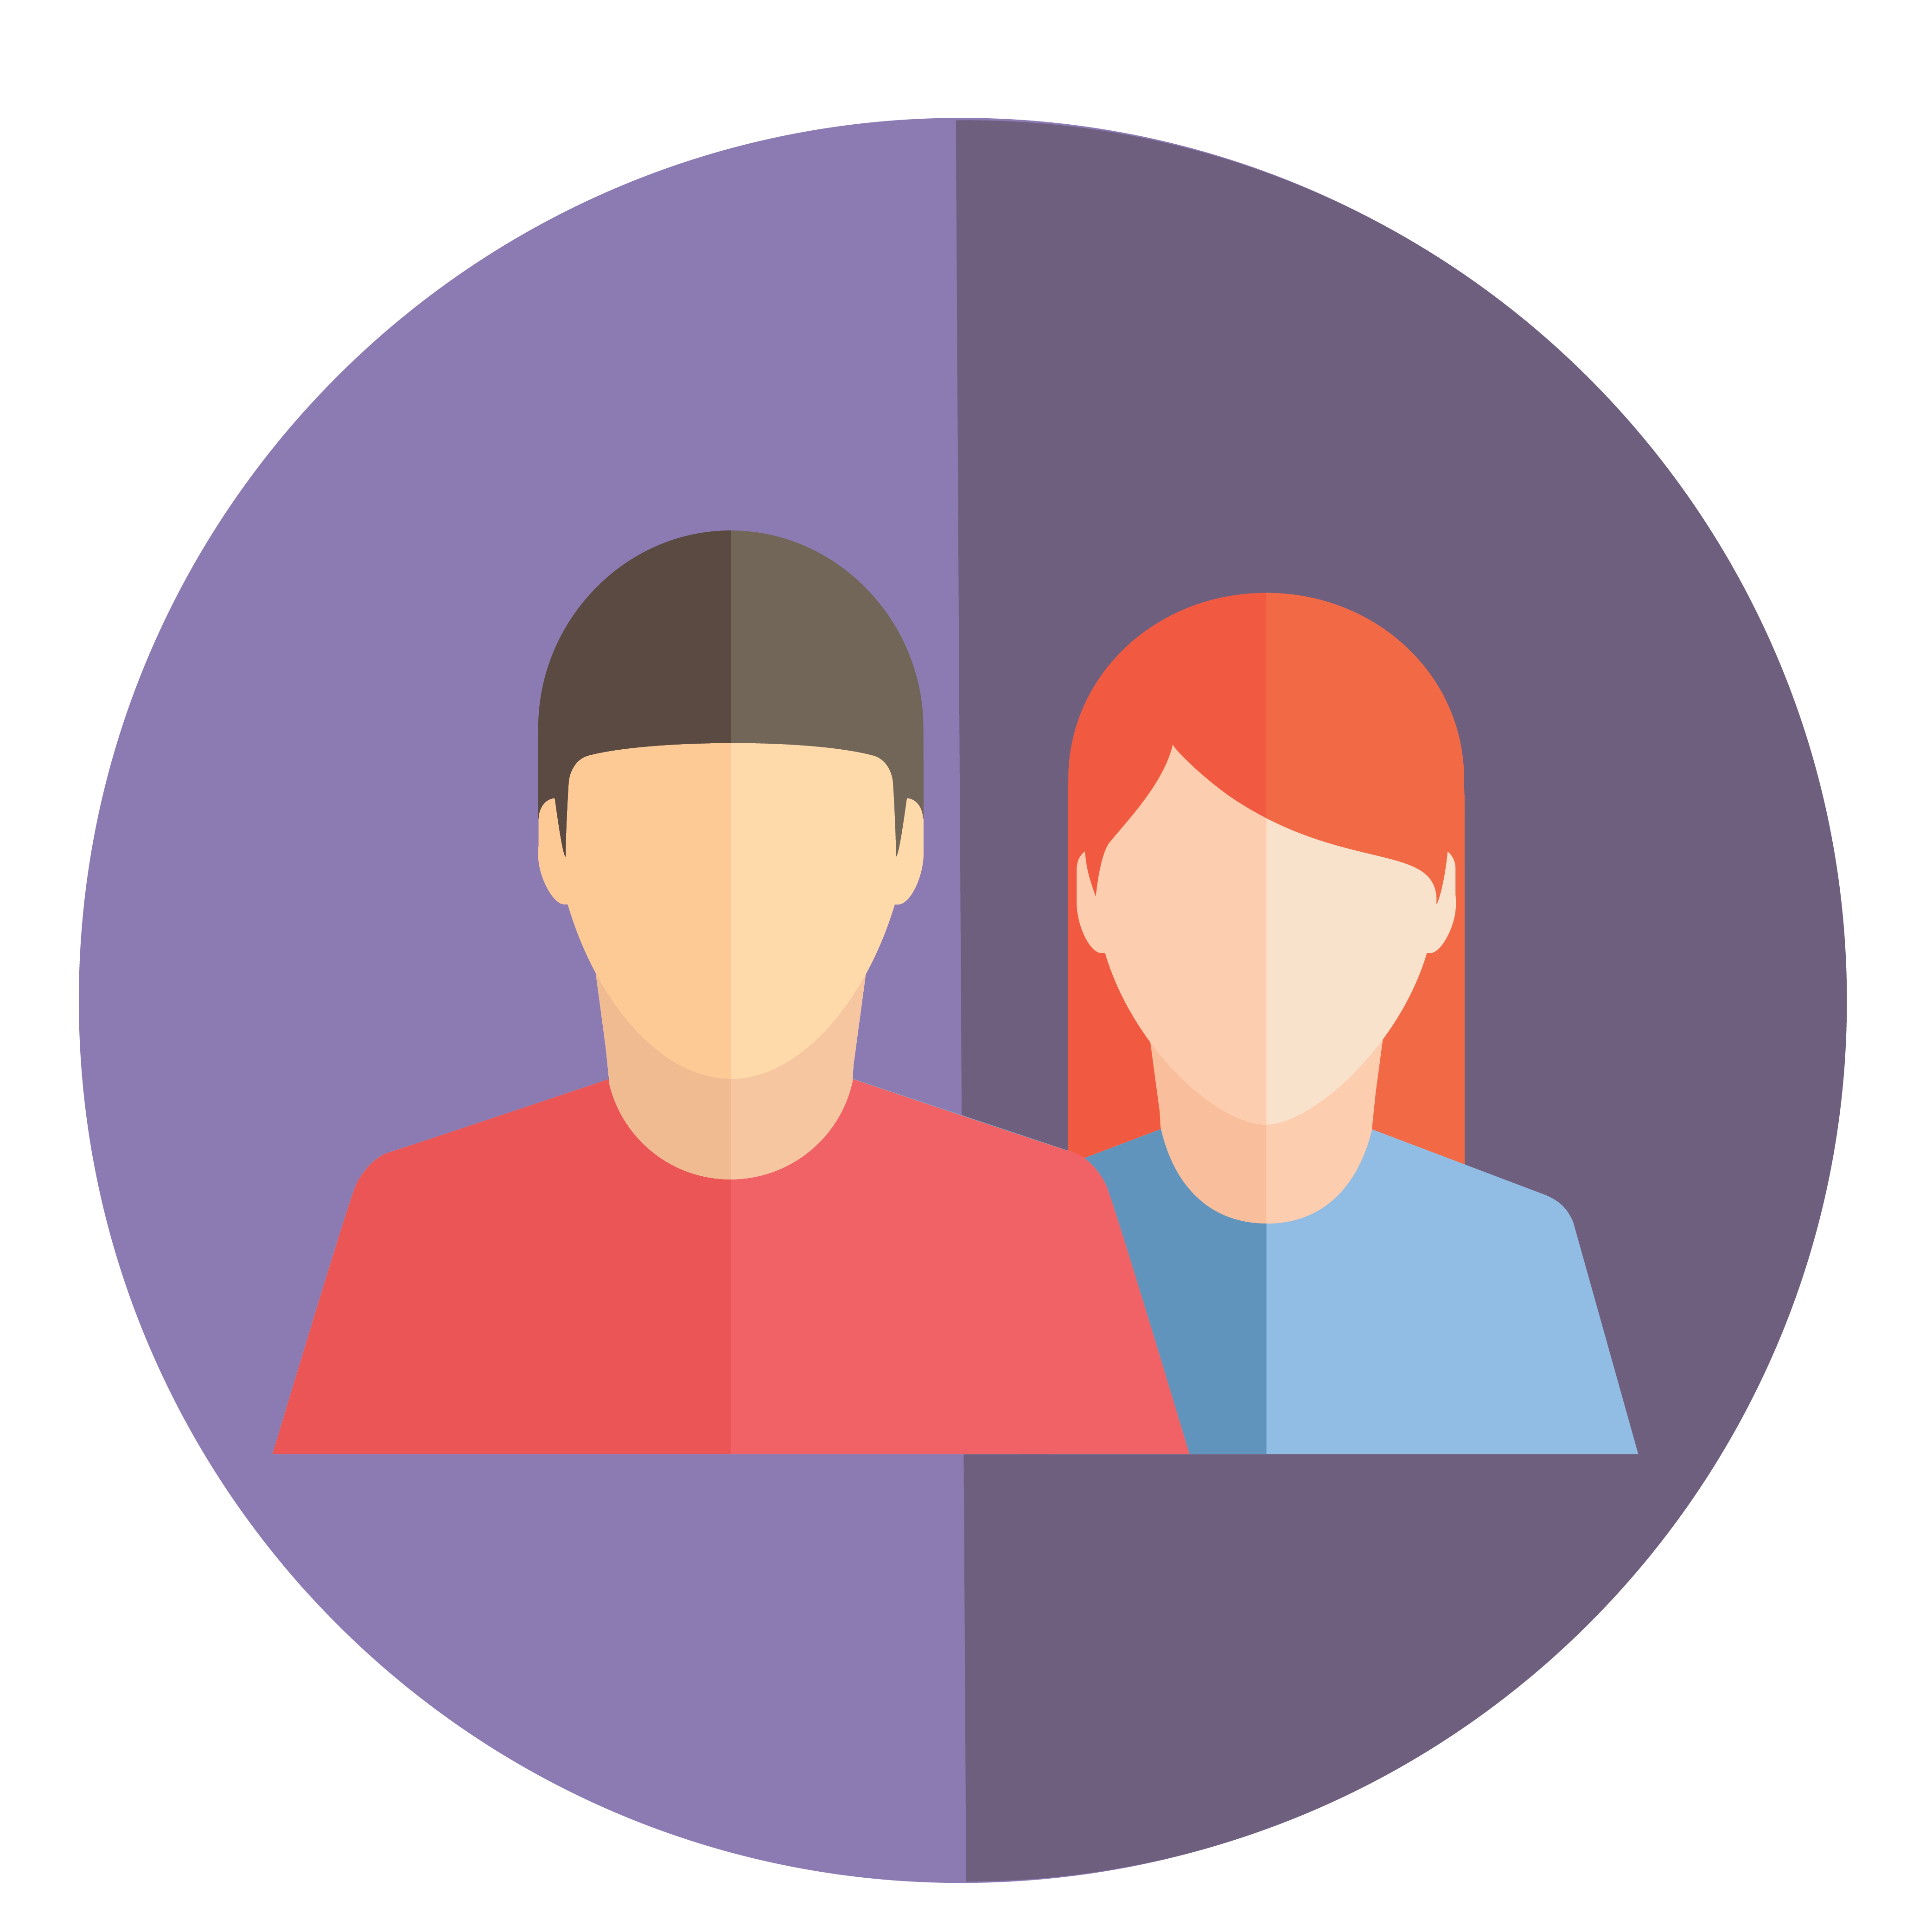 simplified illustration of two people in a purple circle